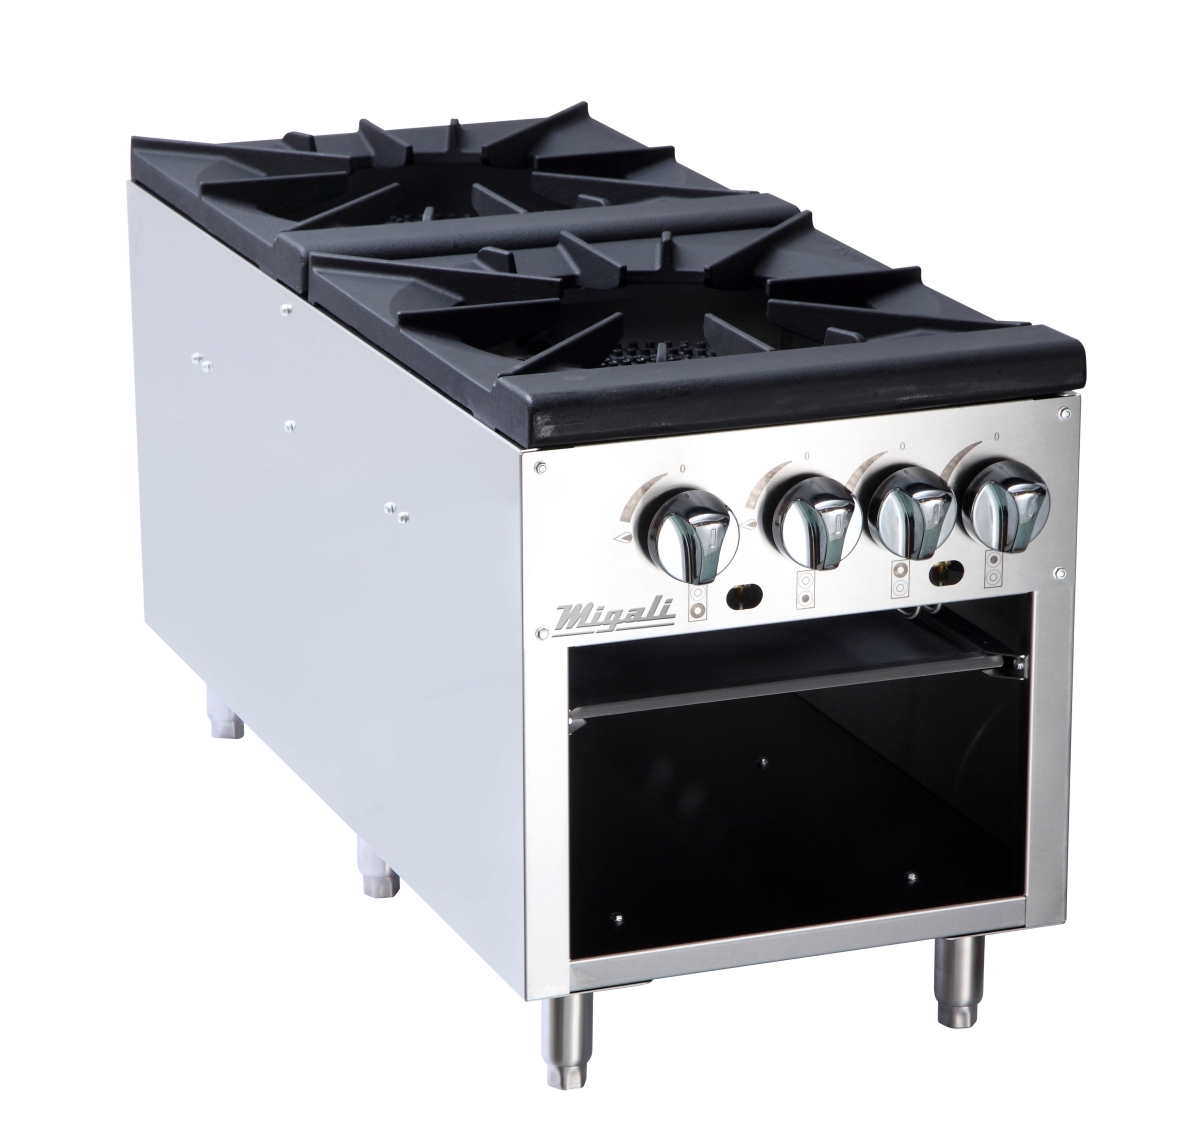 C-sps-2-18 18 In. 40000 Btu Competitor Series 2 Burners Stock Pot Stove, Stainless Steel